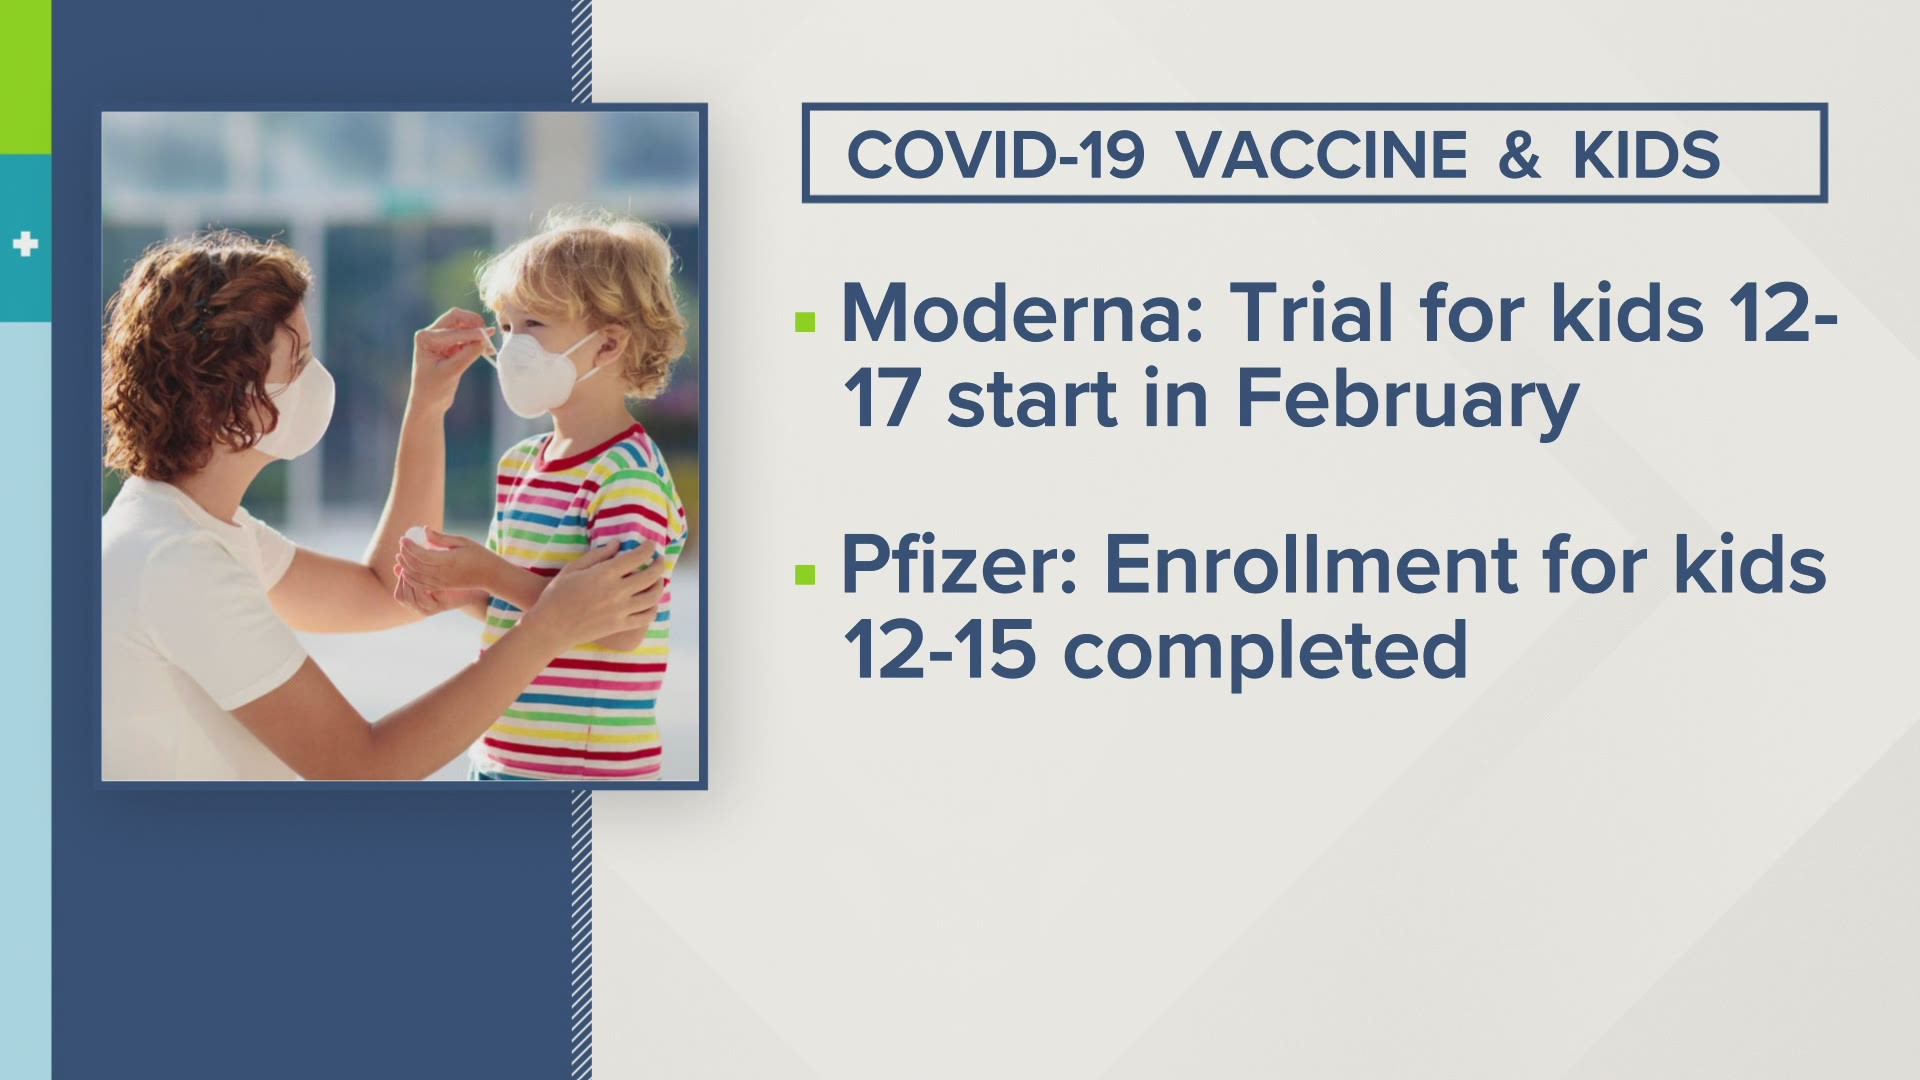 Moderna will begin its pediatric clinical trials next month for children 12 through 17. And Pfizer just completed enrollment for its study in kids 12 to 15.